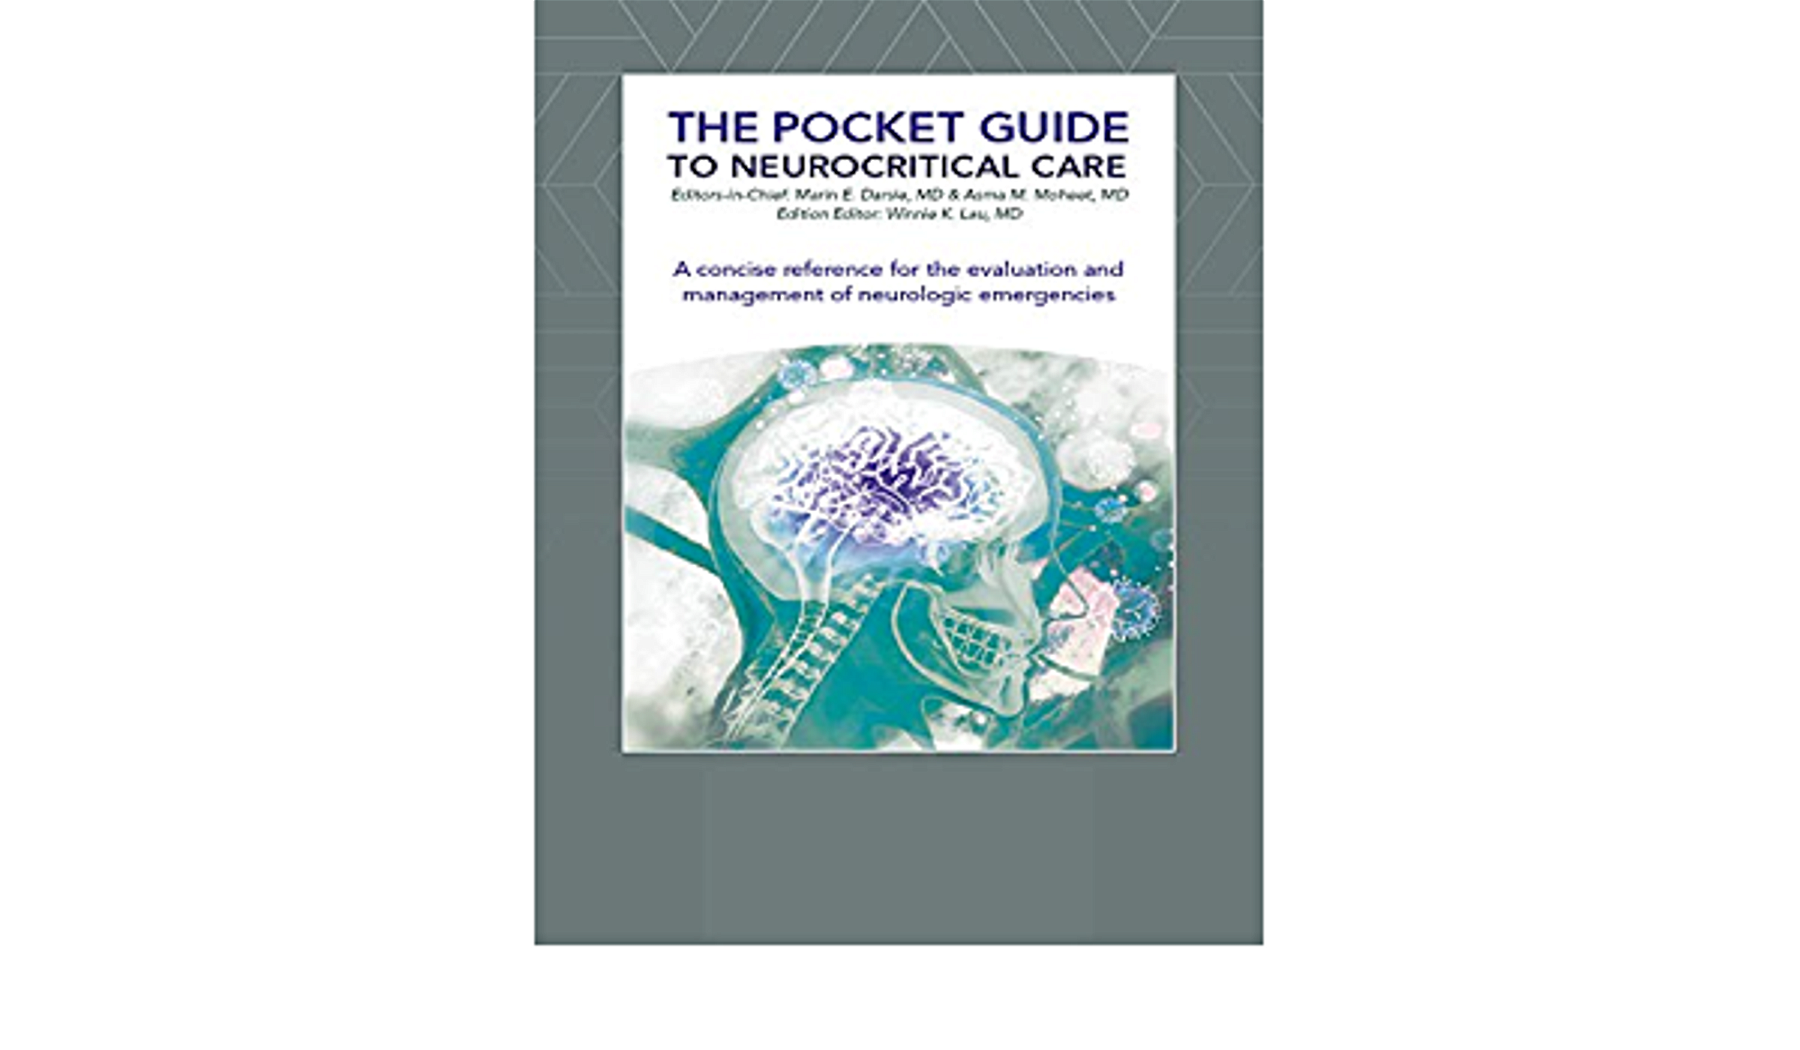 The Pocket Guide to Neurocritical Care